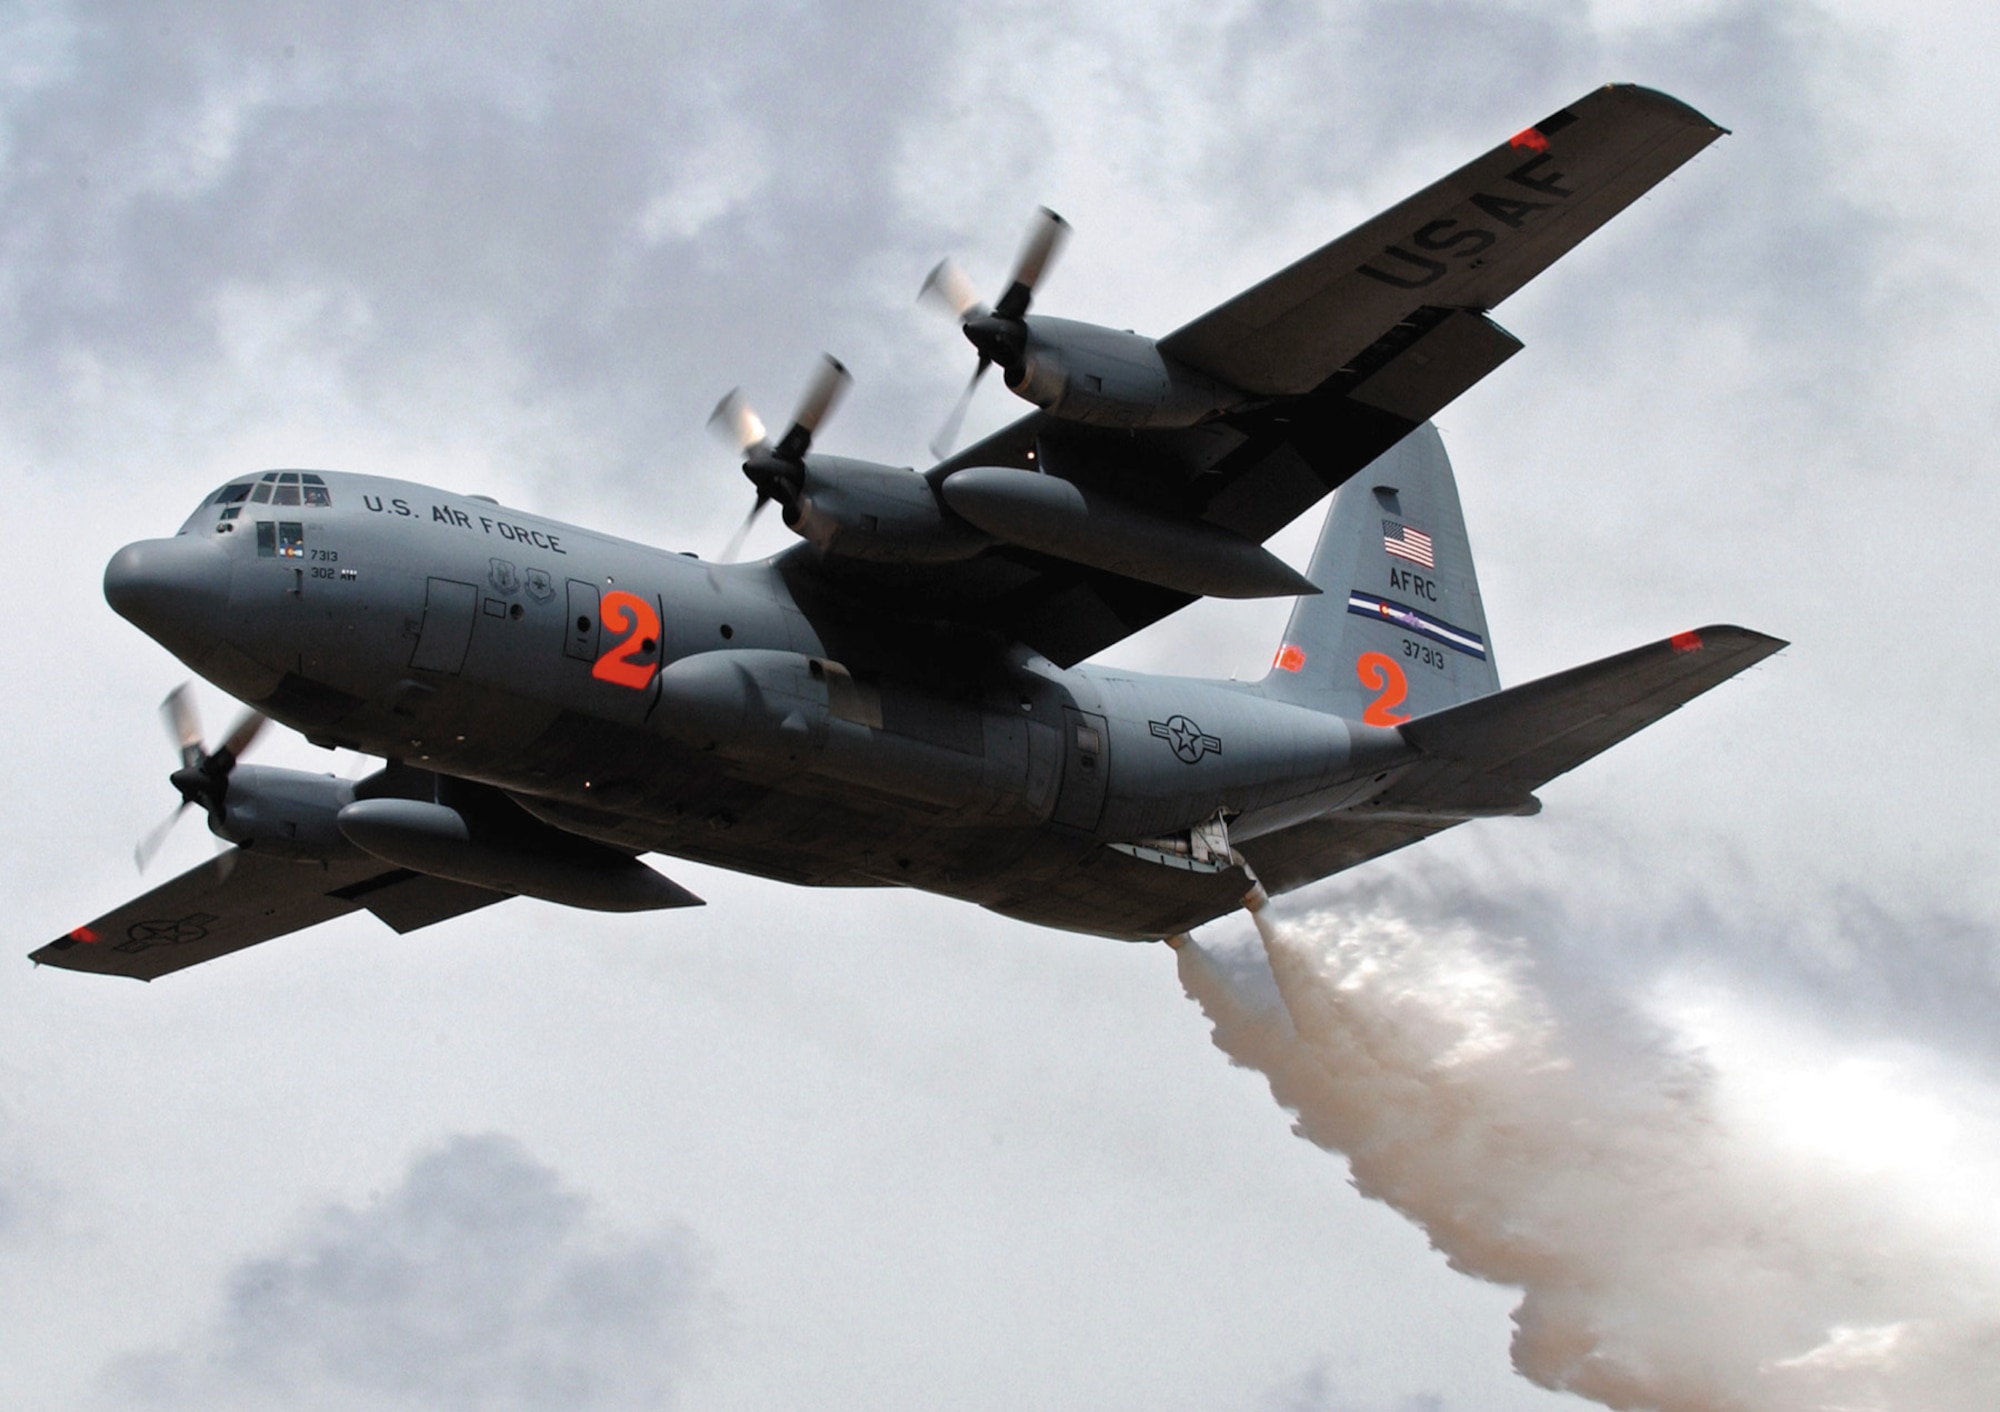 A C-130H Hercules from the 302nd Airlift Wing at Peterson Air Force Base, Colo., drops a load of water during annual Modular Airborne Firefighting System training in Albuquerque, N.M., May 2. C-130 aircrews from the 302nd and three Air National Guard units participated in the training in preparation for the 2007 wild fire season. The 302nd AW is the only Air Force Reserve Command unit equipped with the airborne firefighting system. In an actual mission, a C-130 equipped with MAFFS is capable of dropping 2,700 gallons of fire-retardant chemicals. Crews drop the chemicals in front of, not directly on, fires in an effort to slow down or stop their progress. (Tech. Sgt. Rick Sforza)  
